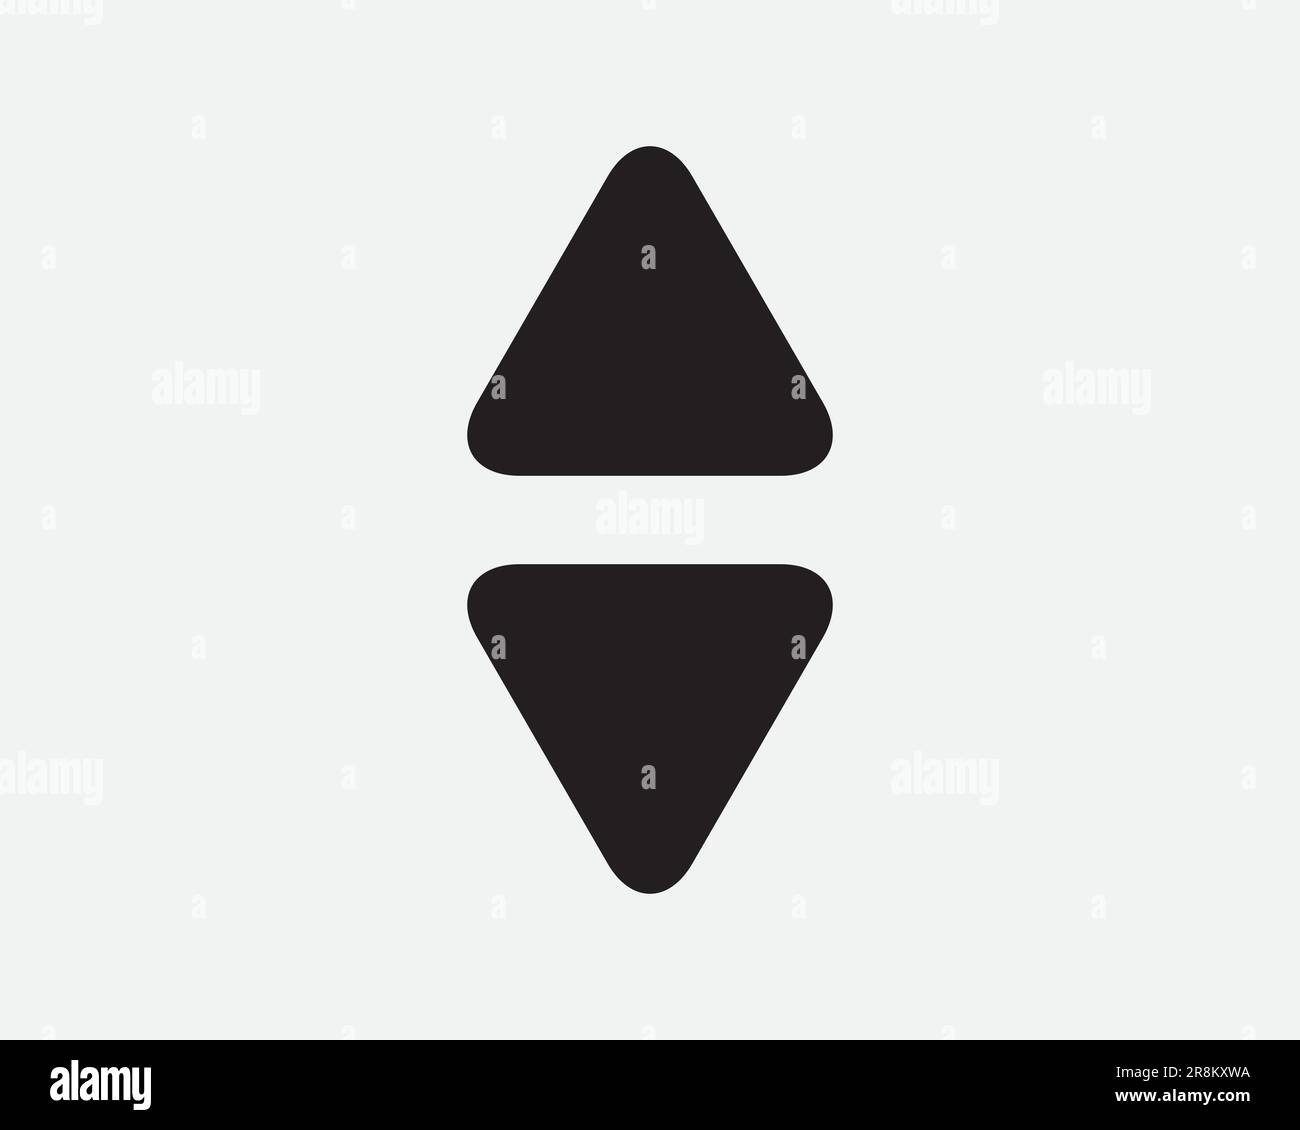 Up Down Triangle Arrow Icon Lift Elevator Button Direction Navigation Front Back. Black and White Sign Symbol Illustration Artwork Clipart EPS Vector Stock Vector